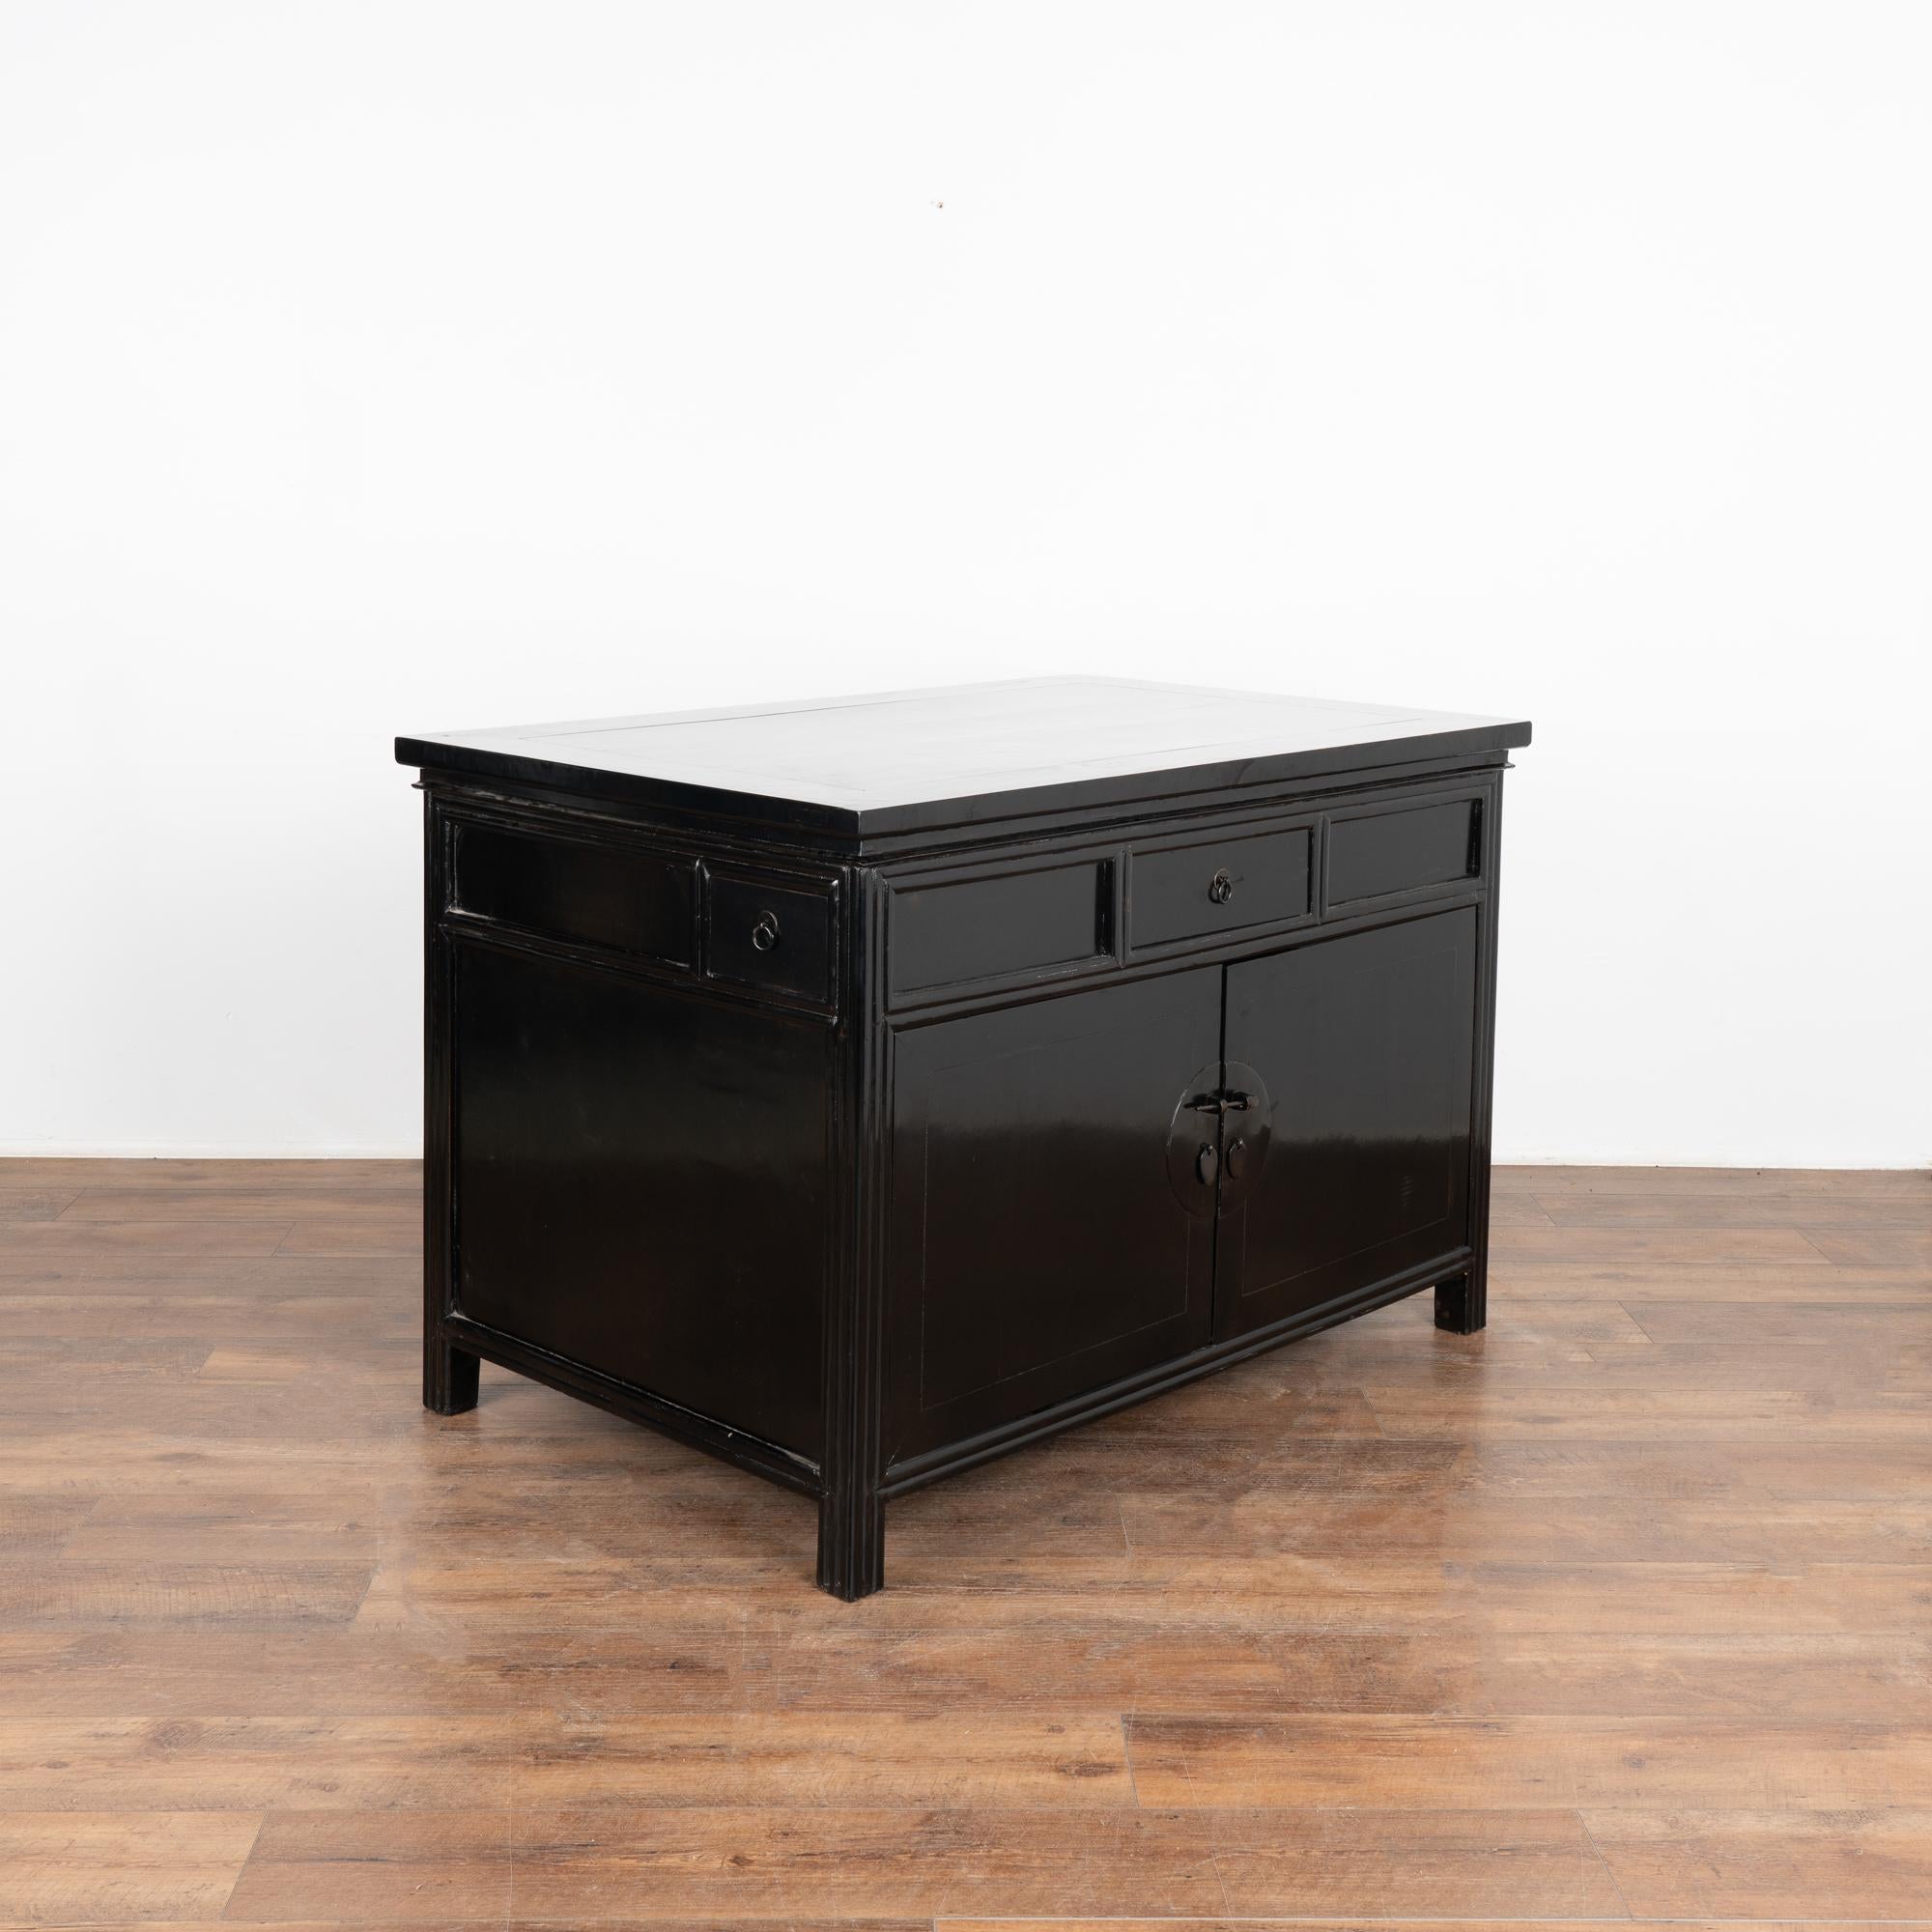 Black Lacquered Free Standing Console Cabinet or Kitchen Island, China 1880 2